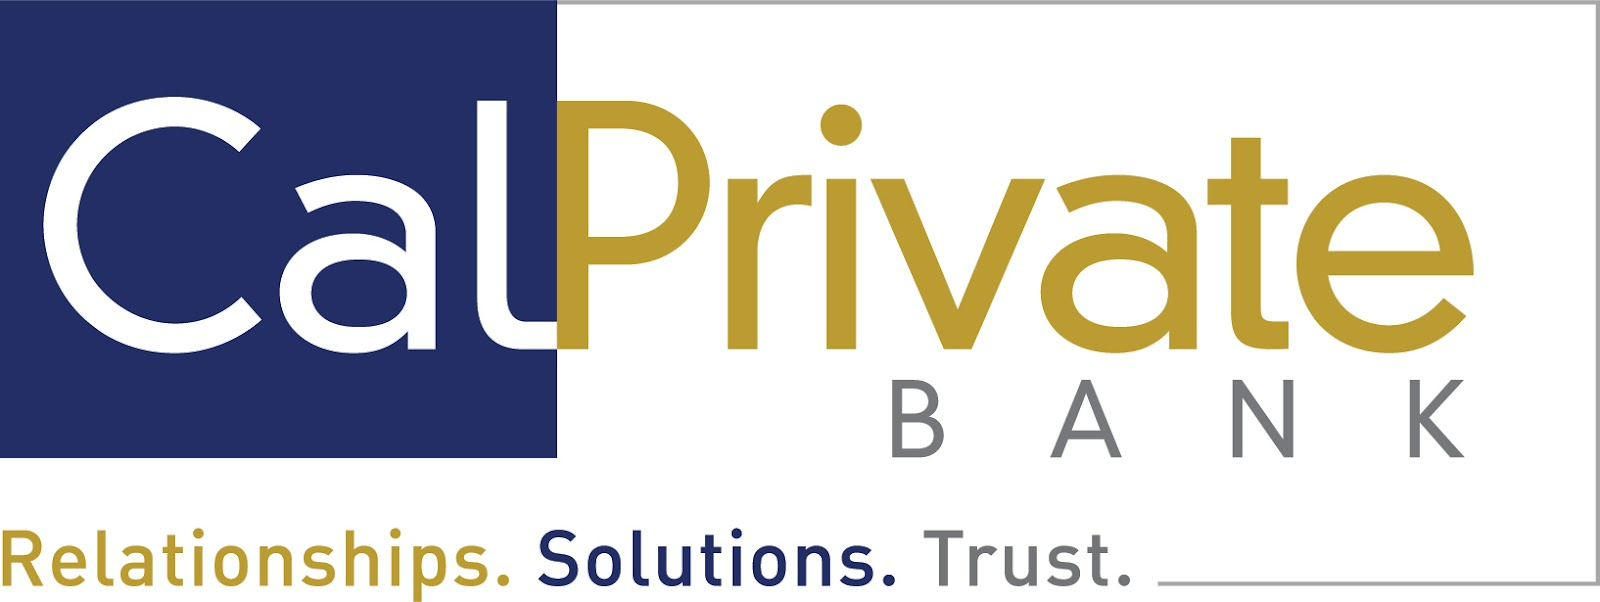 Cal Private Bank